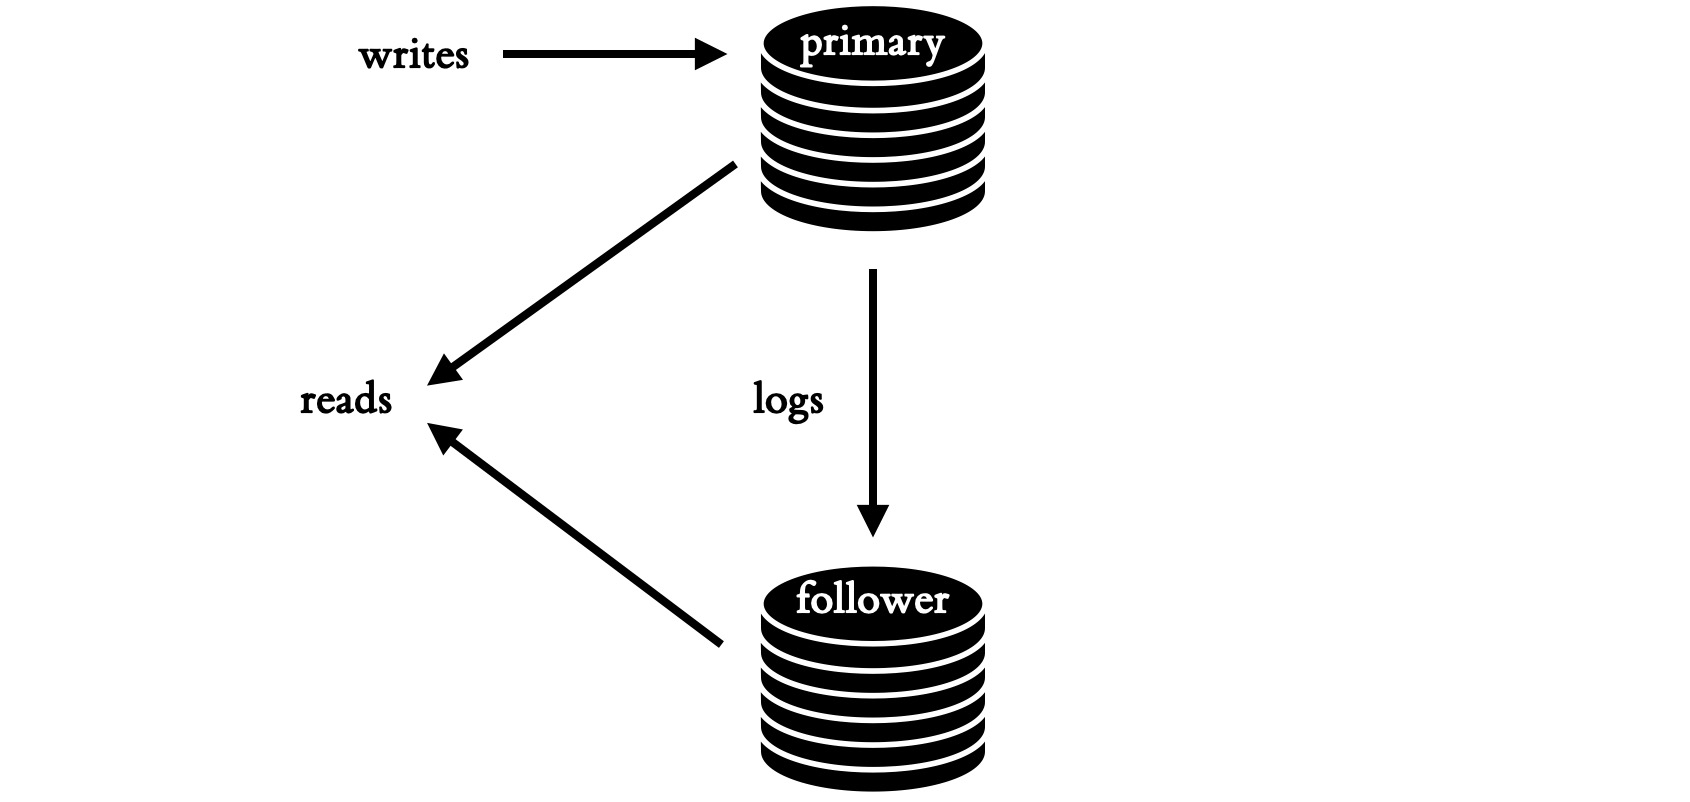 Diagrame of two databases labelled “primary” and “follower”. Writes go to the primary, logs go from primary to follower, and reads come from the primary and follower.